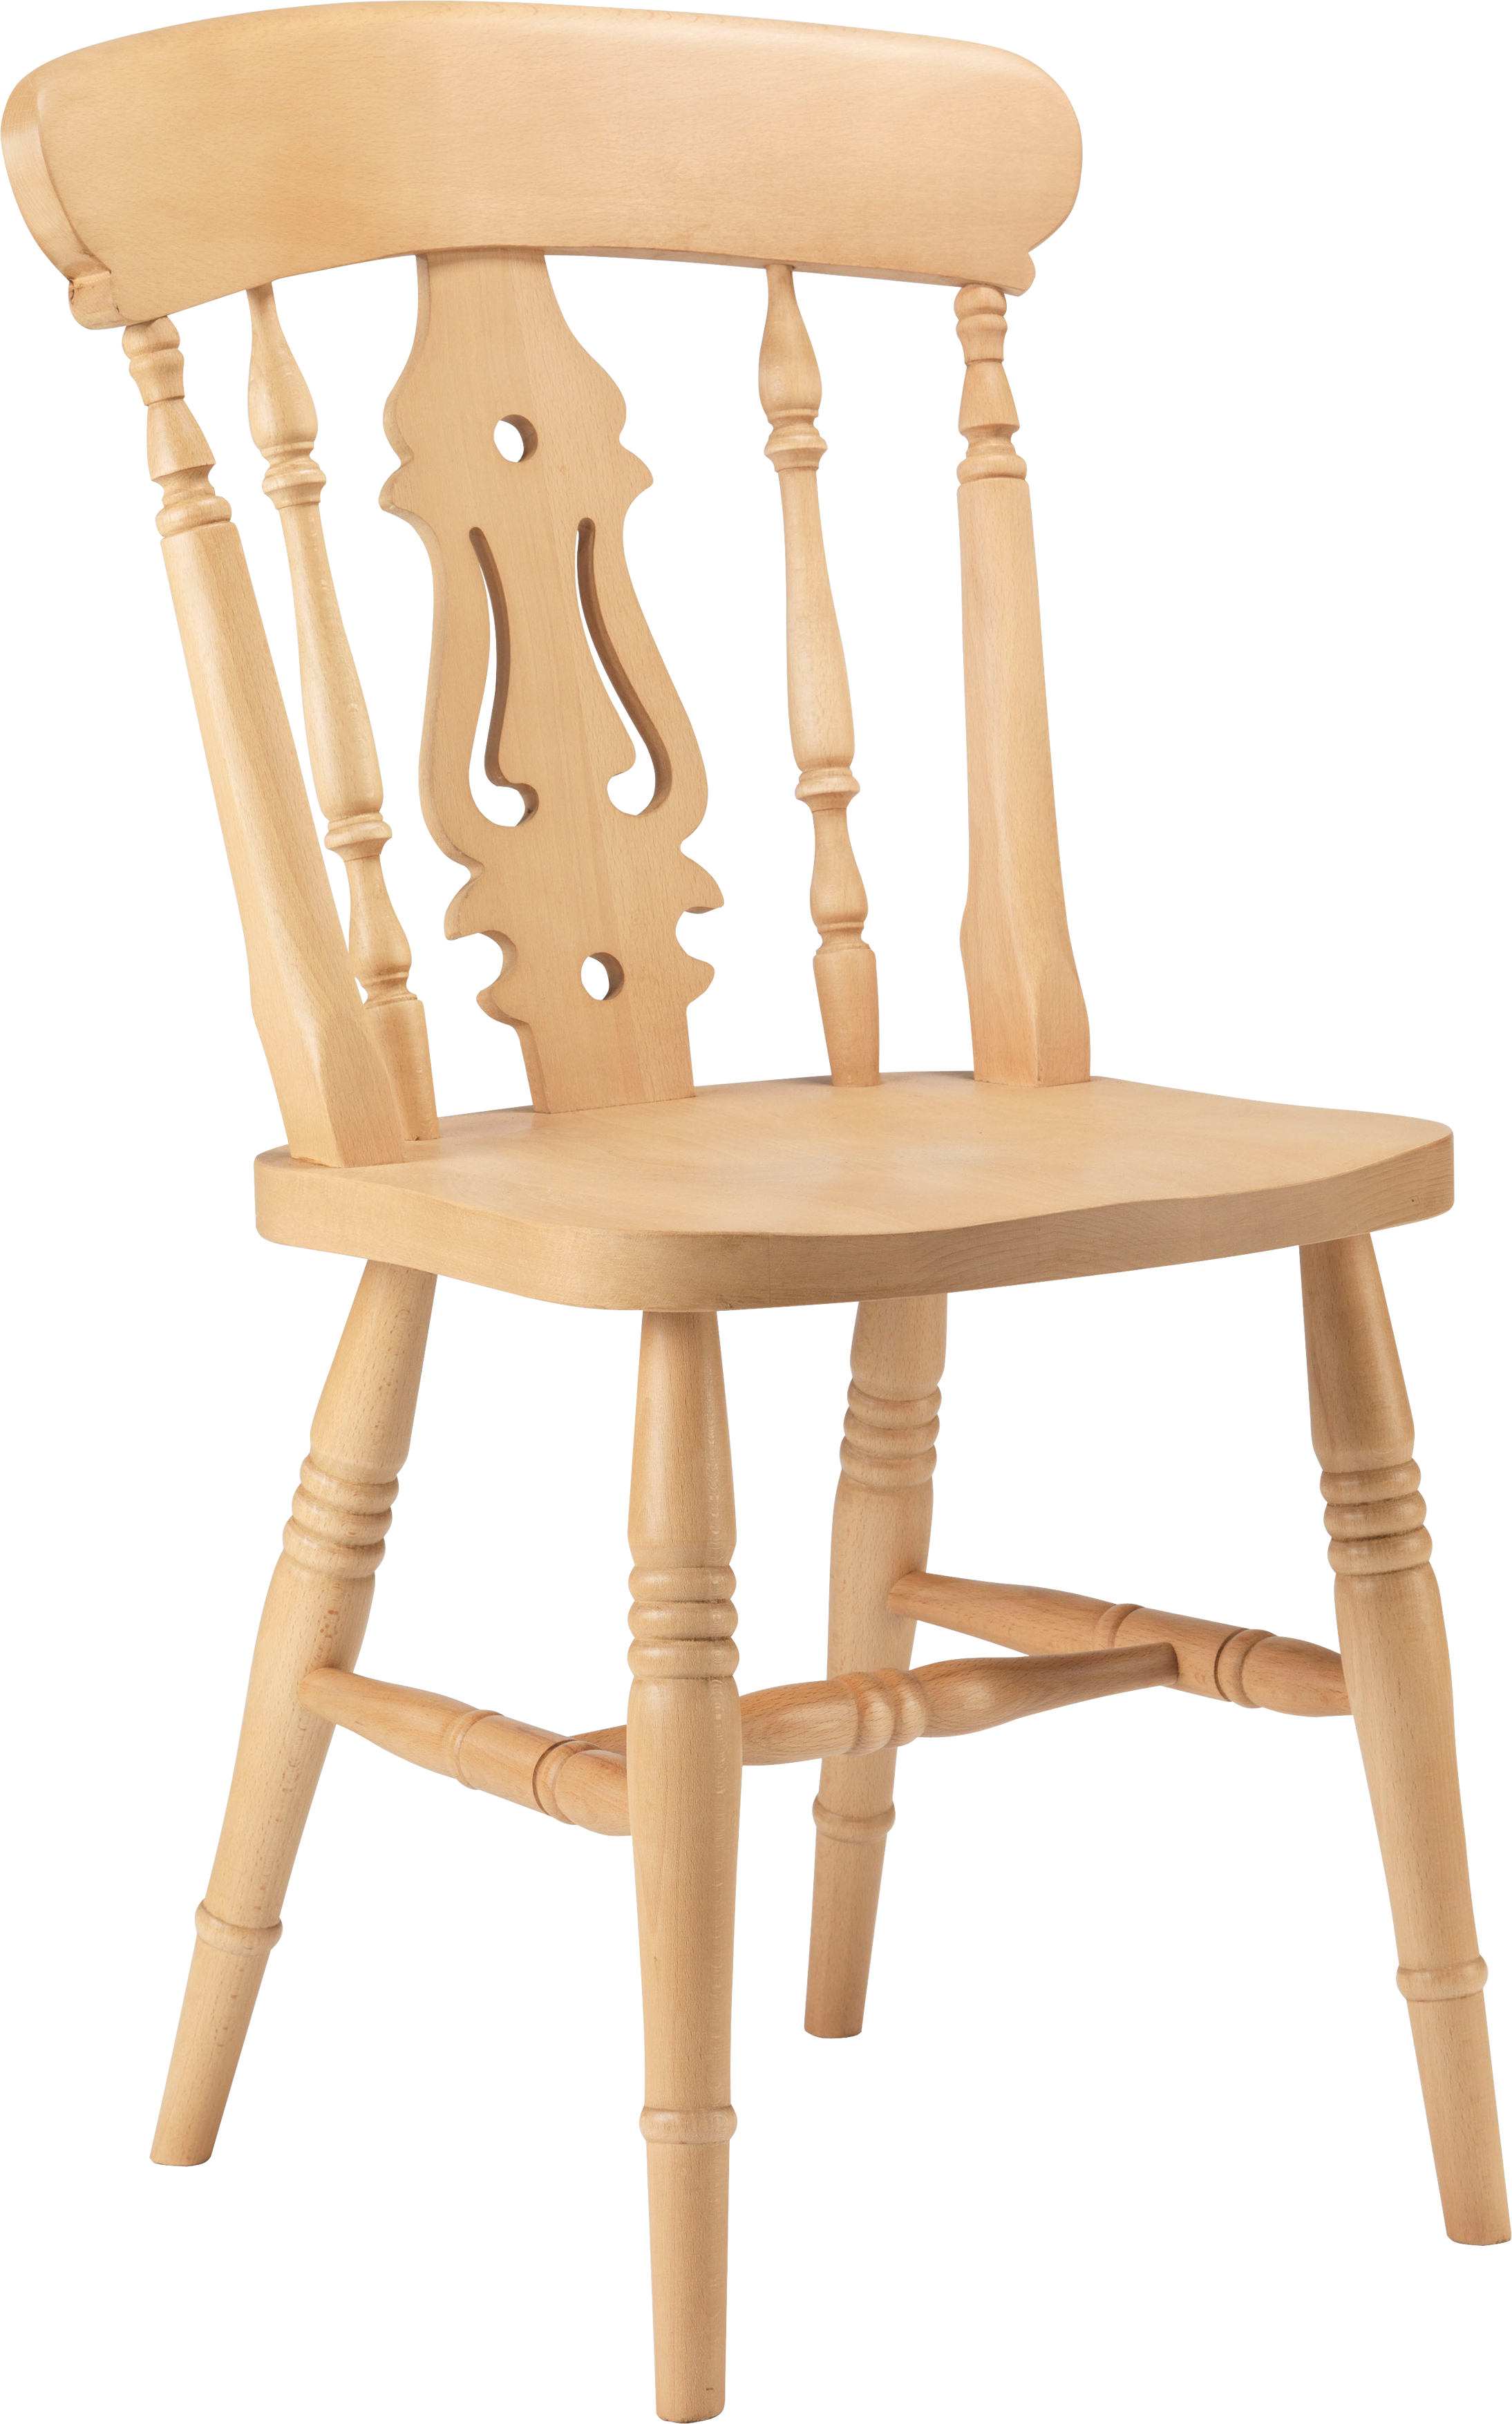 Chair PNG image transparent image download, size: 2188x3508px